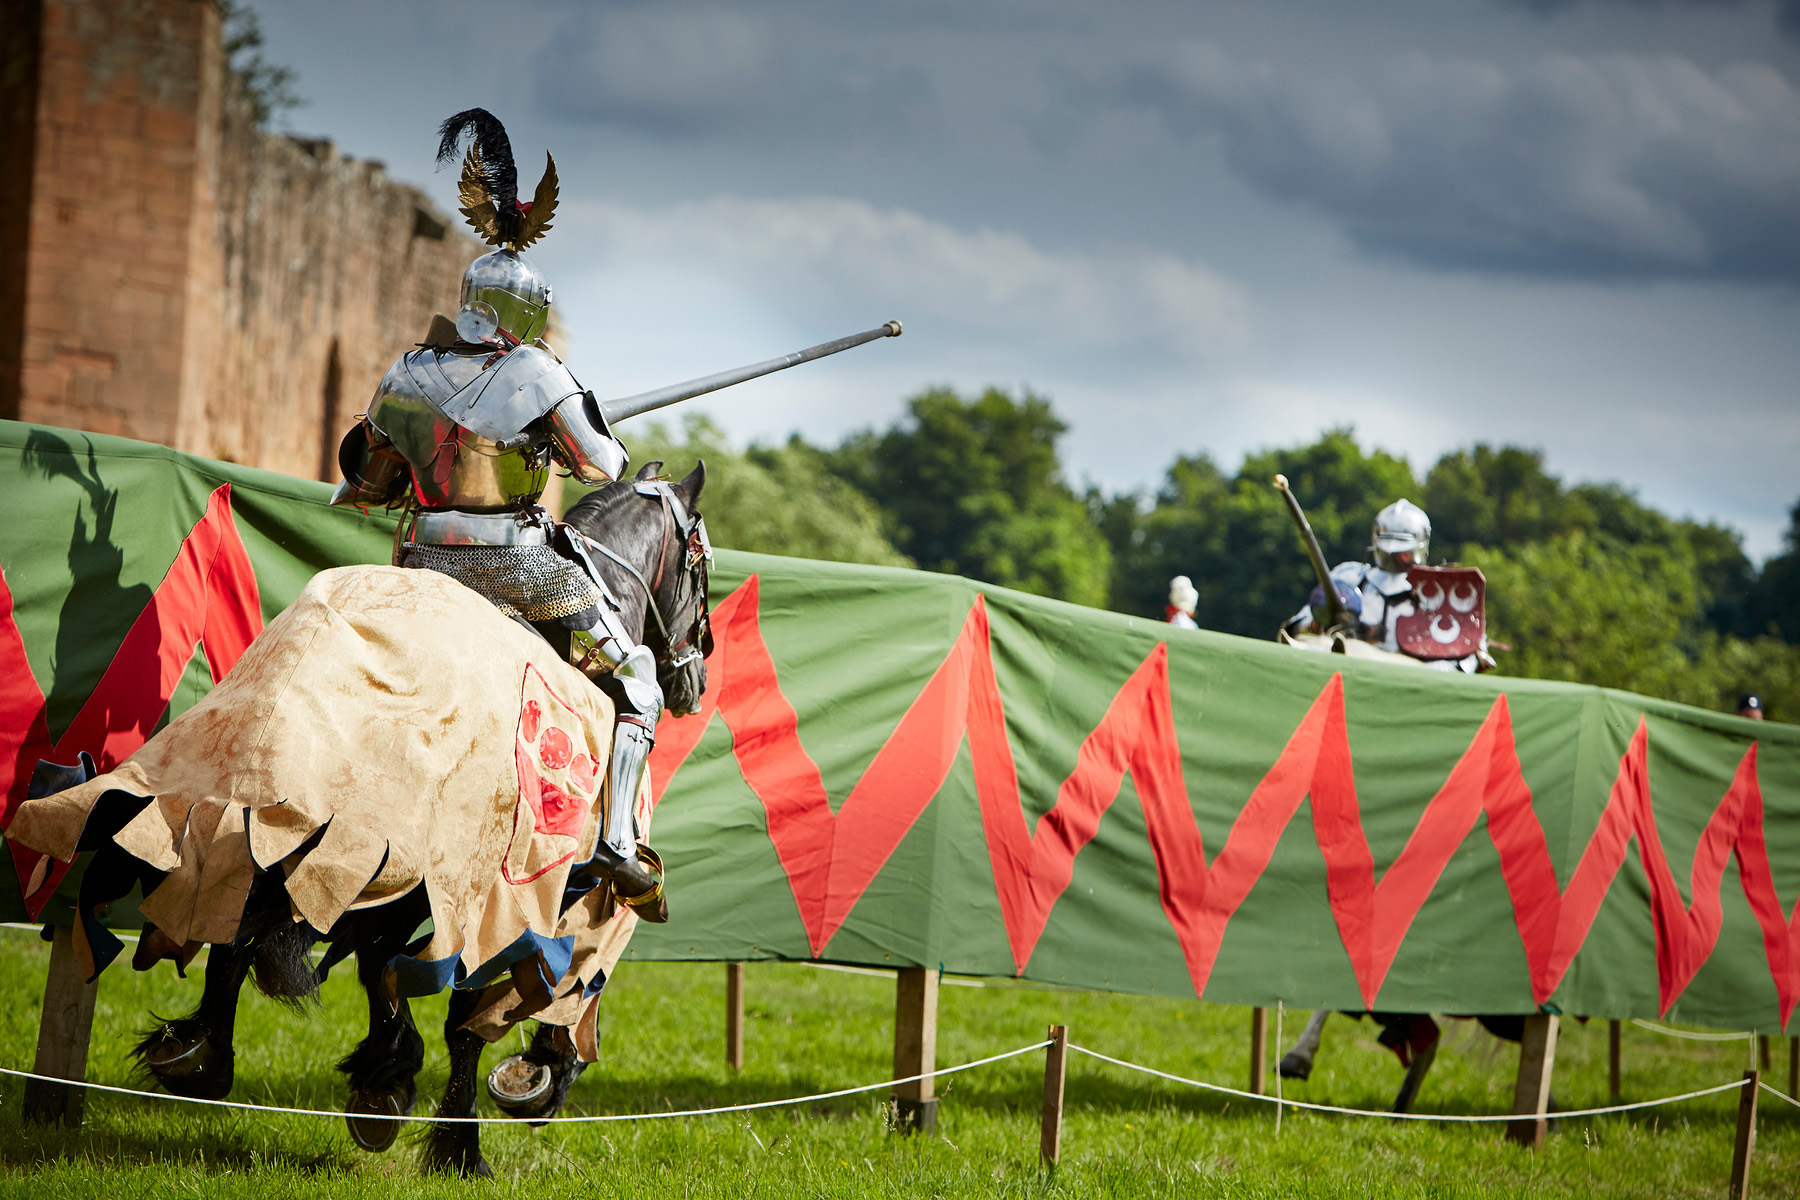 PHOTO: Women will be joining joust tournaments hosted at English Heritage castles in the UK for the first time this summer.